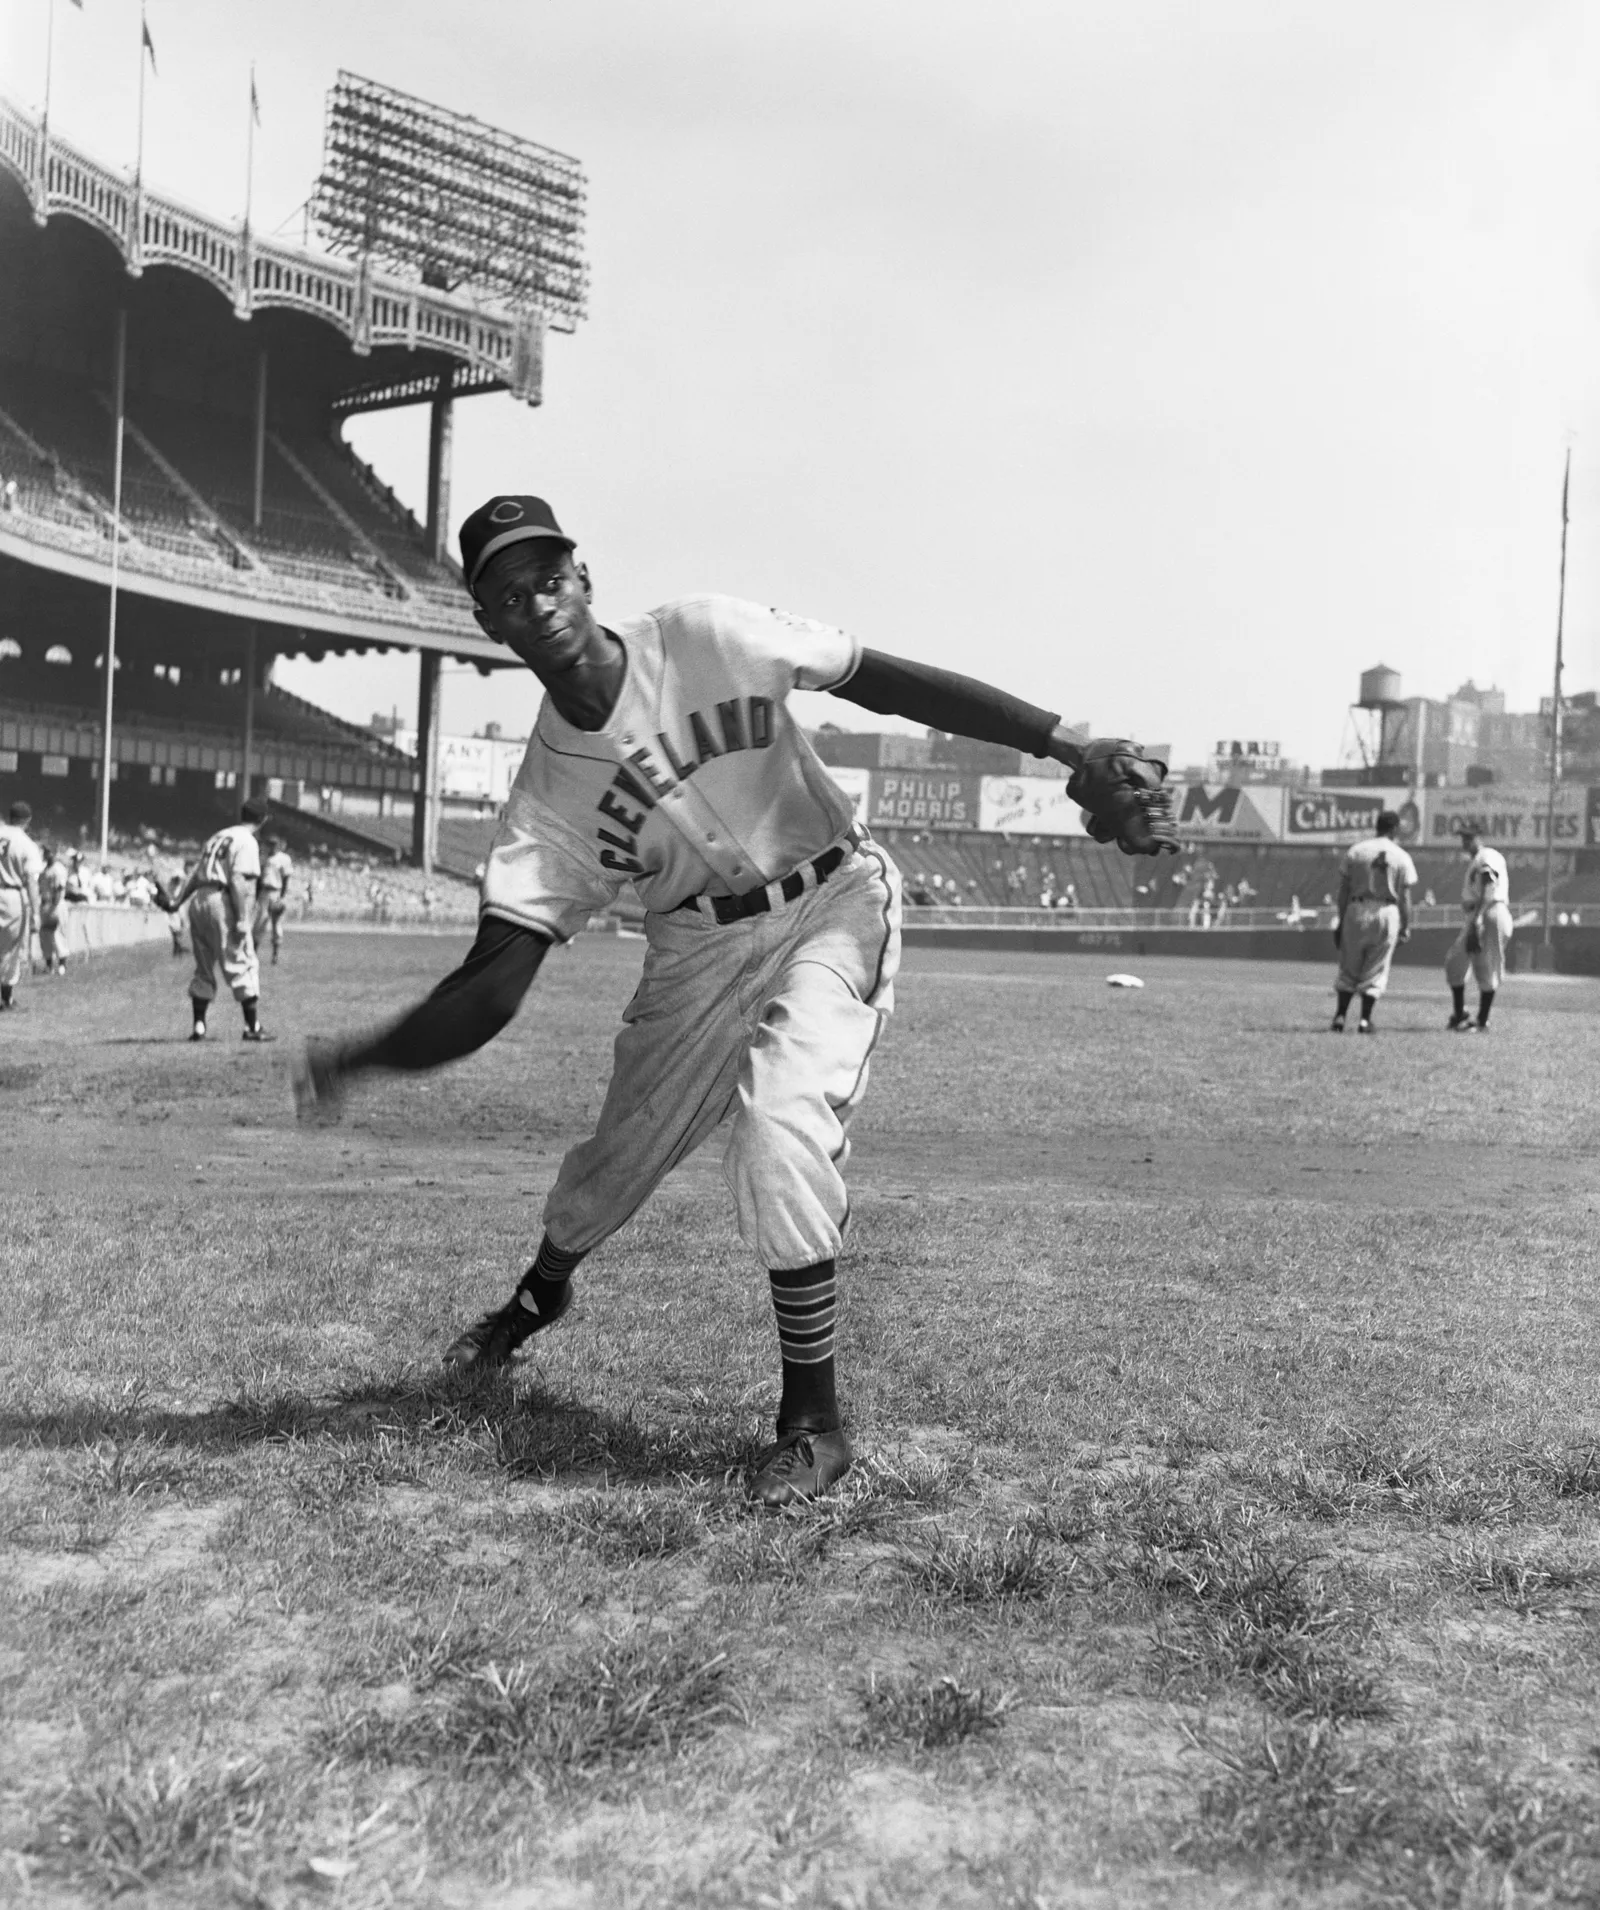 Baseball's OLDEST PLAYER EVER! (The Satchel Paige Story) 